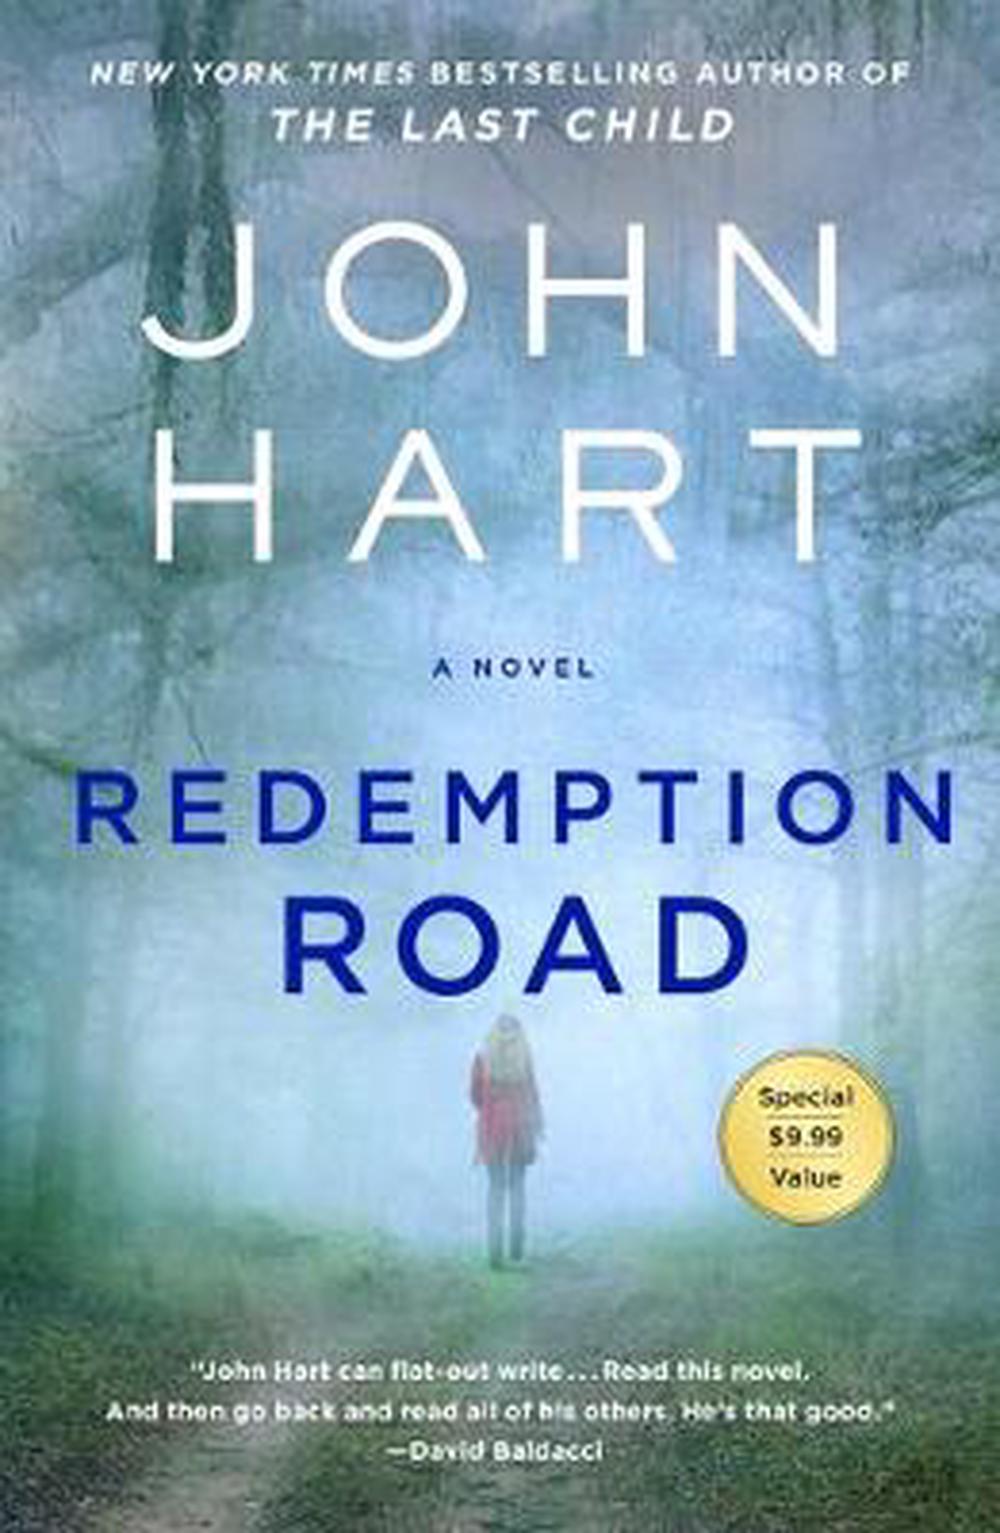 Redemption Road A Novel by John Hart (English) Paperback